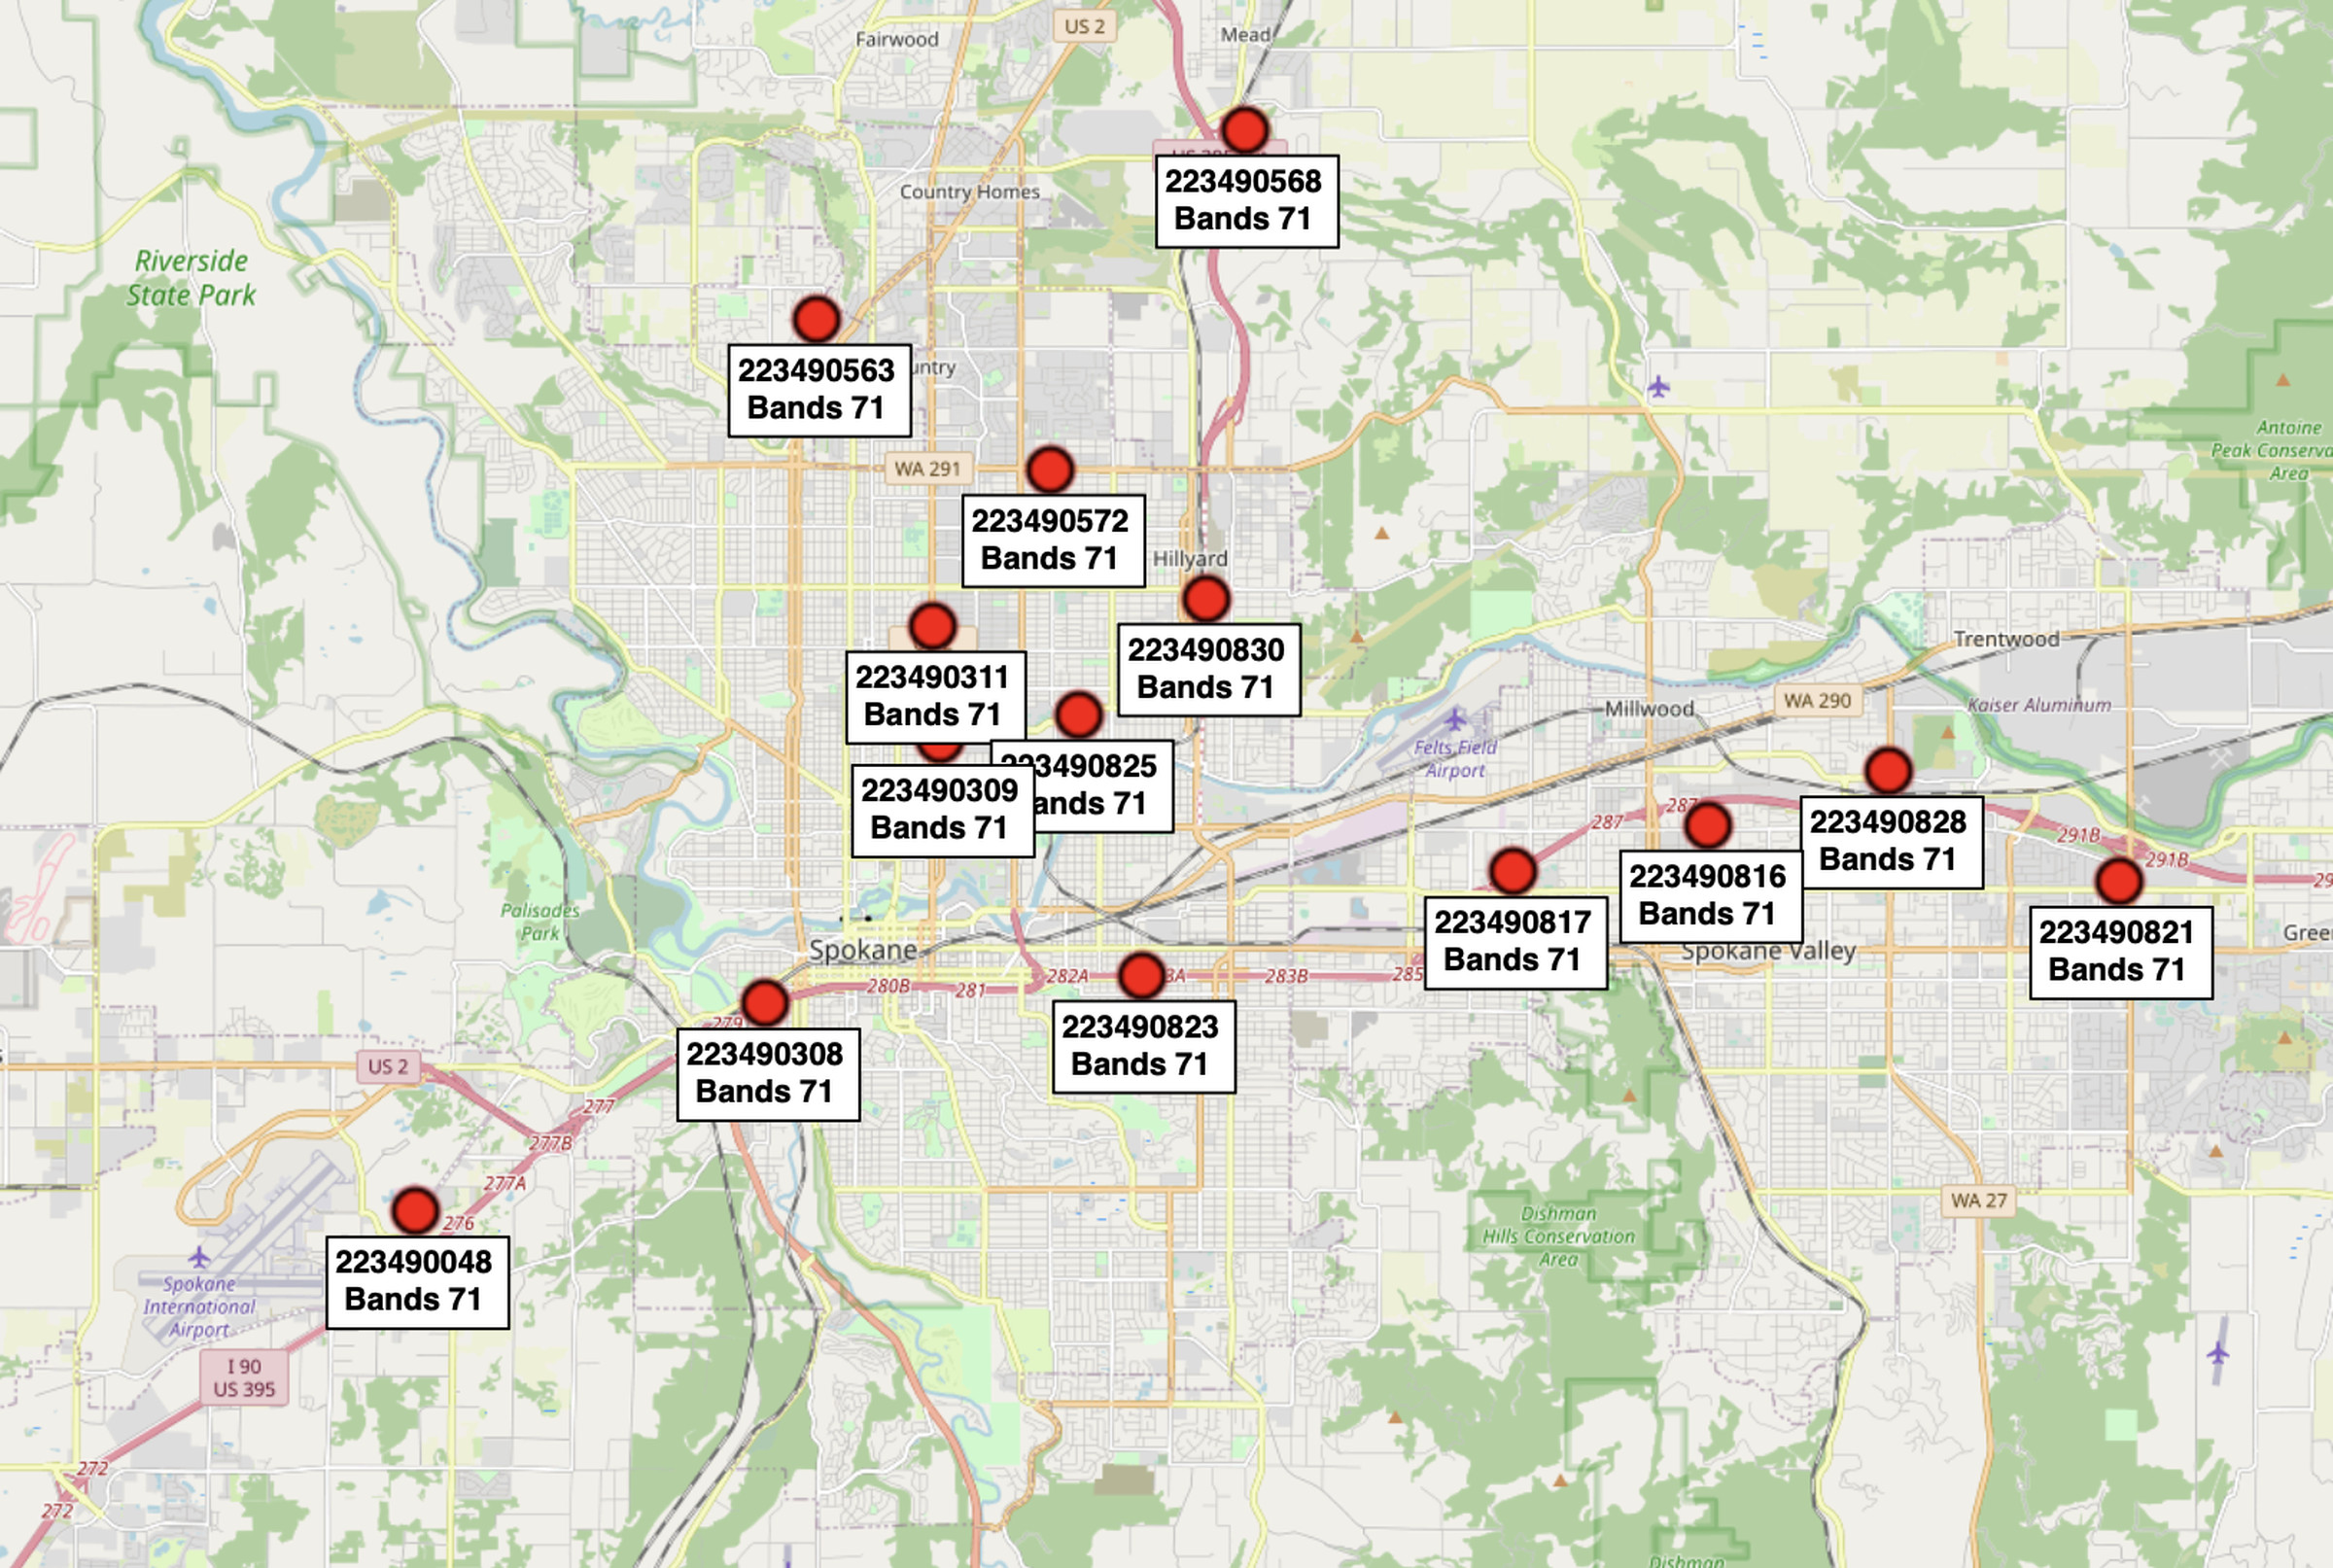 All the towers in Spokane that my phone connected to were putting out signal on Band 70.